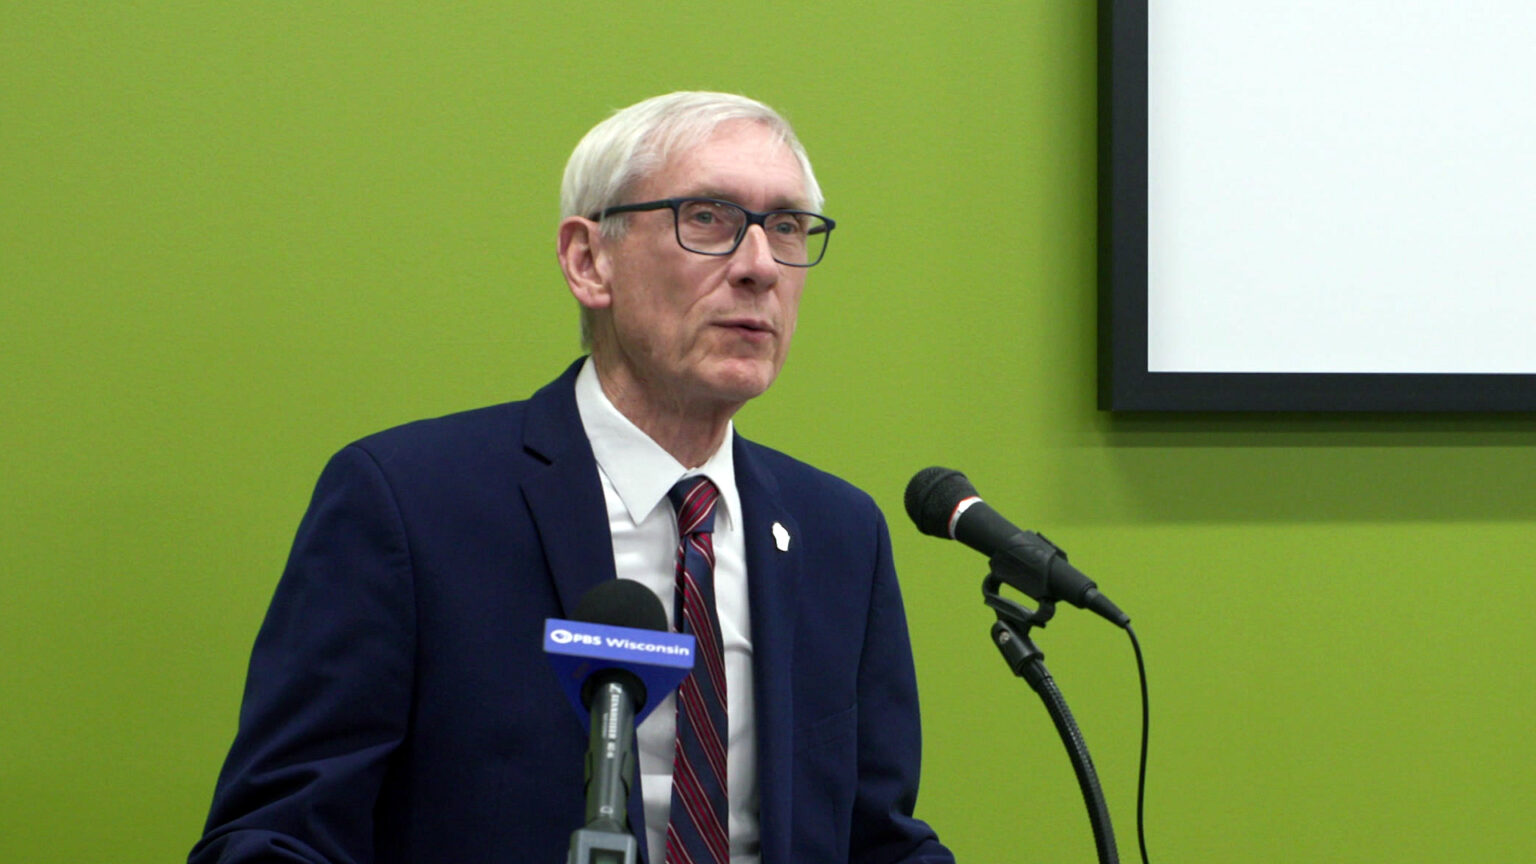 Tony Evers stands and speaks into two microphones, with a whiteboard on the wall behind him.